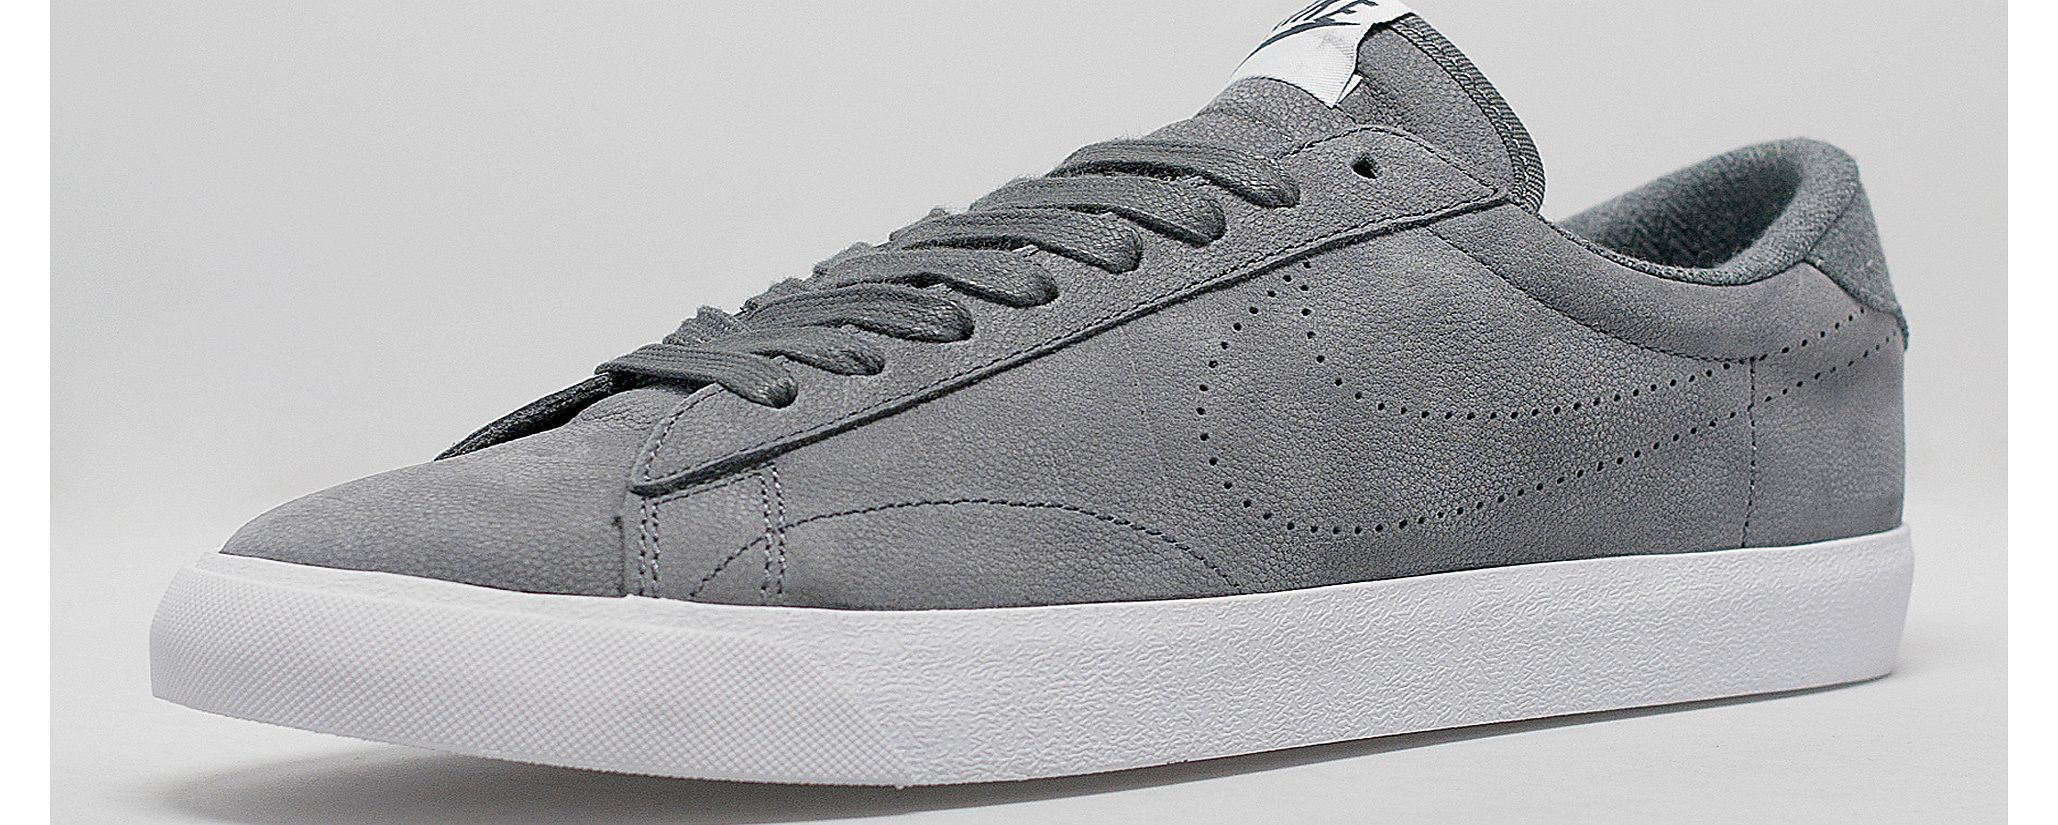 Nike Tennis Classic AC - size? Exclusive